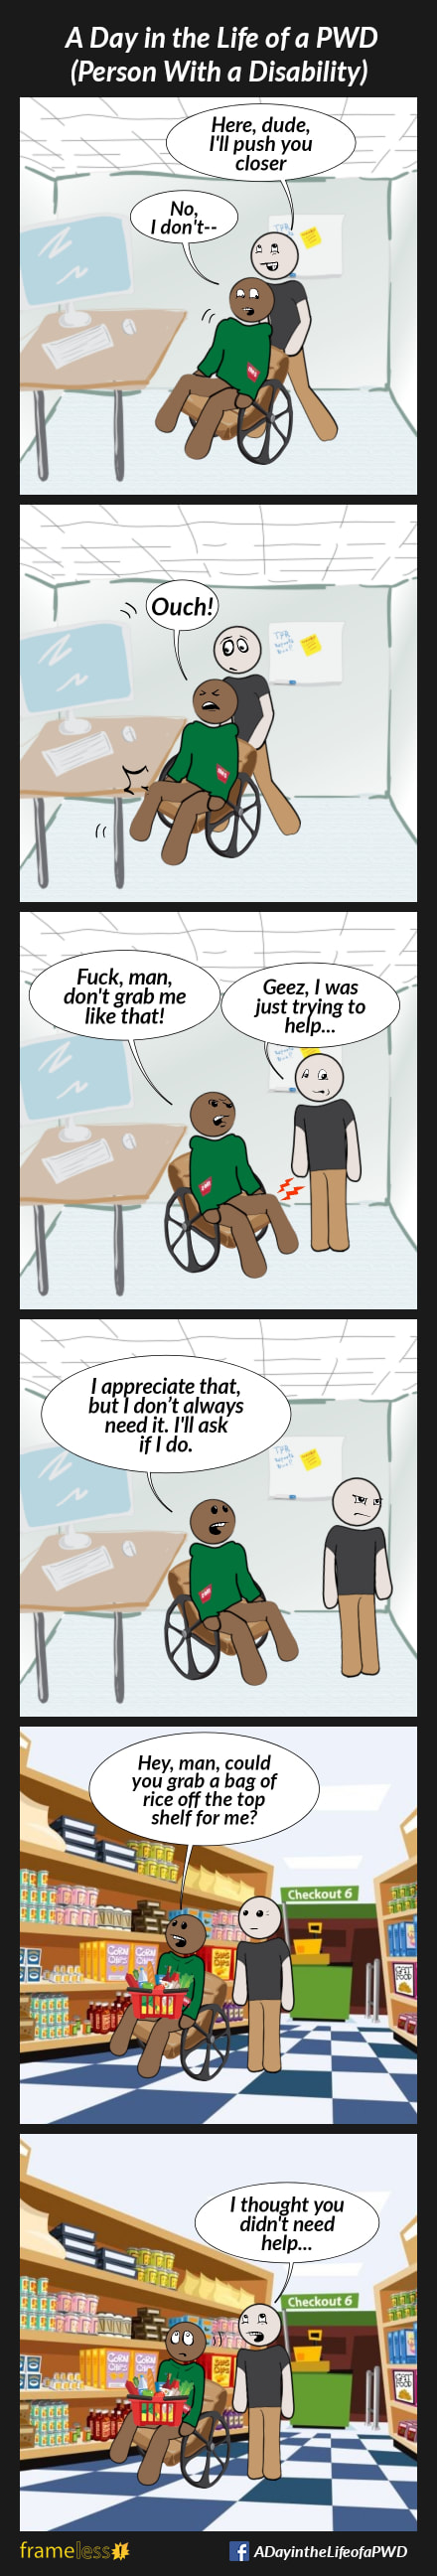 COMIC STRIP 
A Day in the Life of a PWD (Person With a Disability) 

Frame 1:
A man in a wheelchair and his friend are in a classroom.
FRIEND (grabbing the man's chair): Here, dude, I'll push you closer
MAN (startled): No, I don't--

Frame 2:
The friend pushes the man closer to the table, accidentally bashing his knee.
MAN: Ouch!

Frame 3:
MAN (angry): Fuck, man, don't grab me like that!
FRIEND: Geez, I was just trying to help...

Frame 4:
The friend turns away, hurt and angry.
MAN: I appreciate that, but I don’t always need it. I'll ask if I do.

Frame 5:
Later, the man and his friend are in a grocery store aisle.
MAN: Hey, man, could you grab a bag of rice from the top shelf for me?

Frame 6:
FRIEND: I thought you didn't need help...